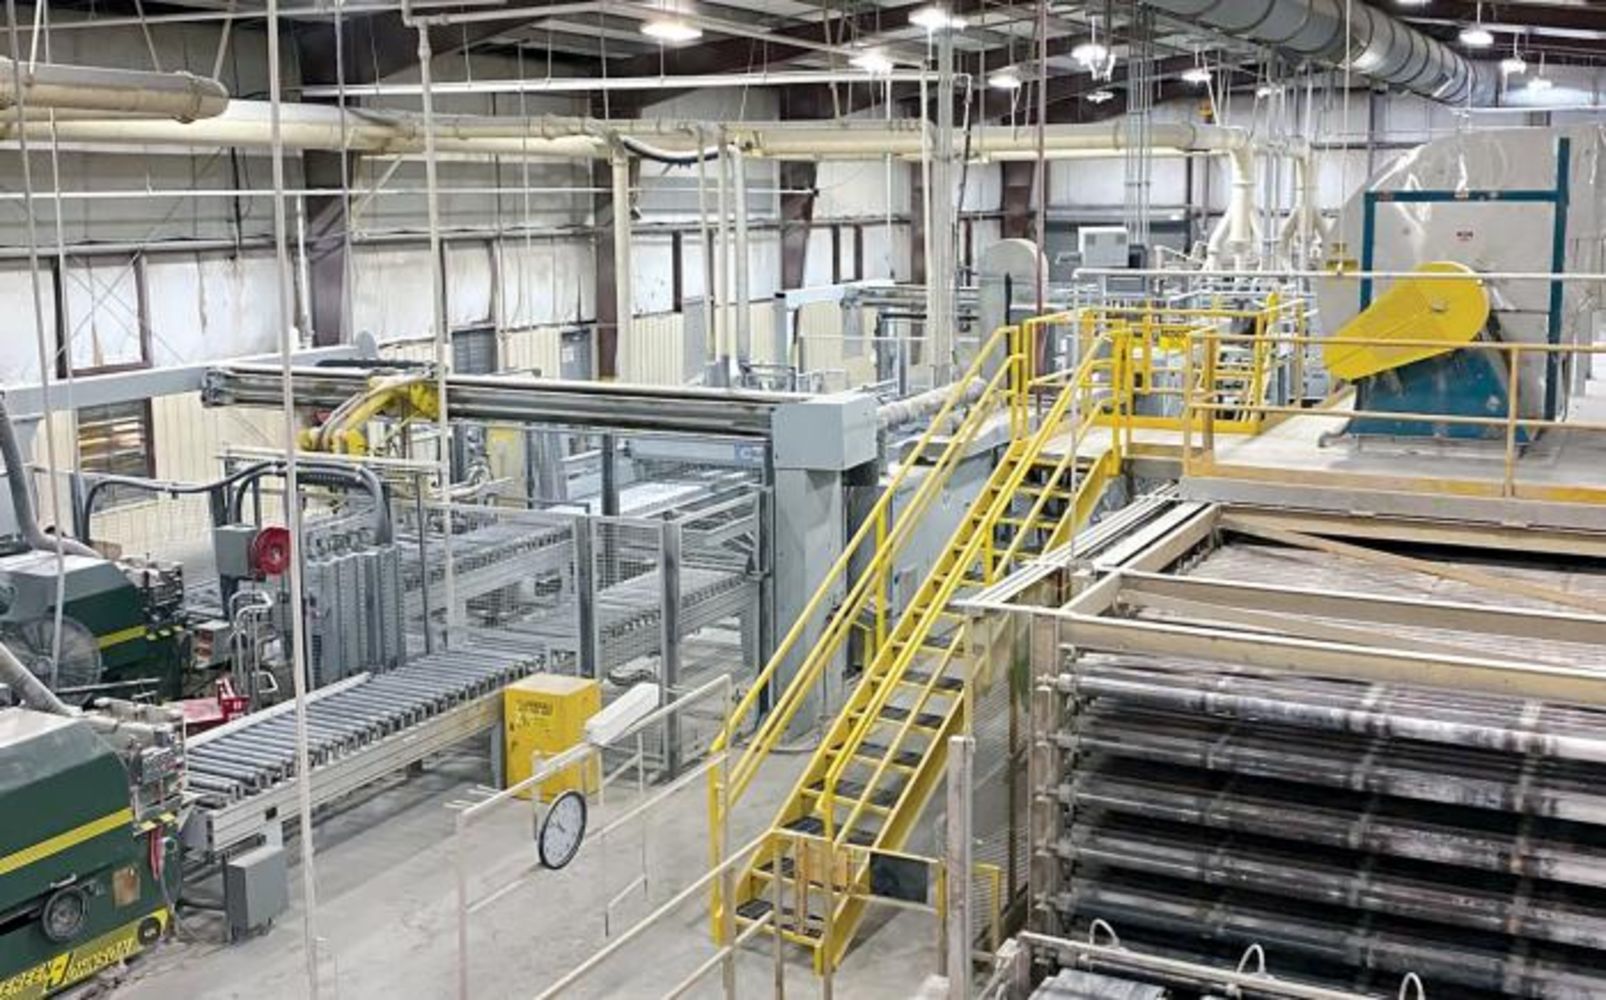 ASSETS FORMERLY OF GEORGIA-PACIFIC’S 100,000 SF GYPSUM CORE DOOR PLANT